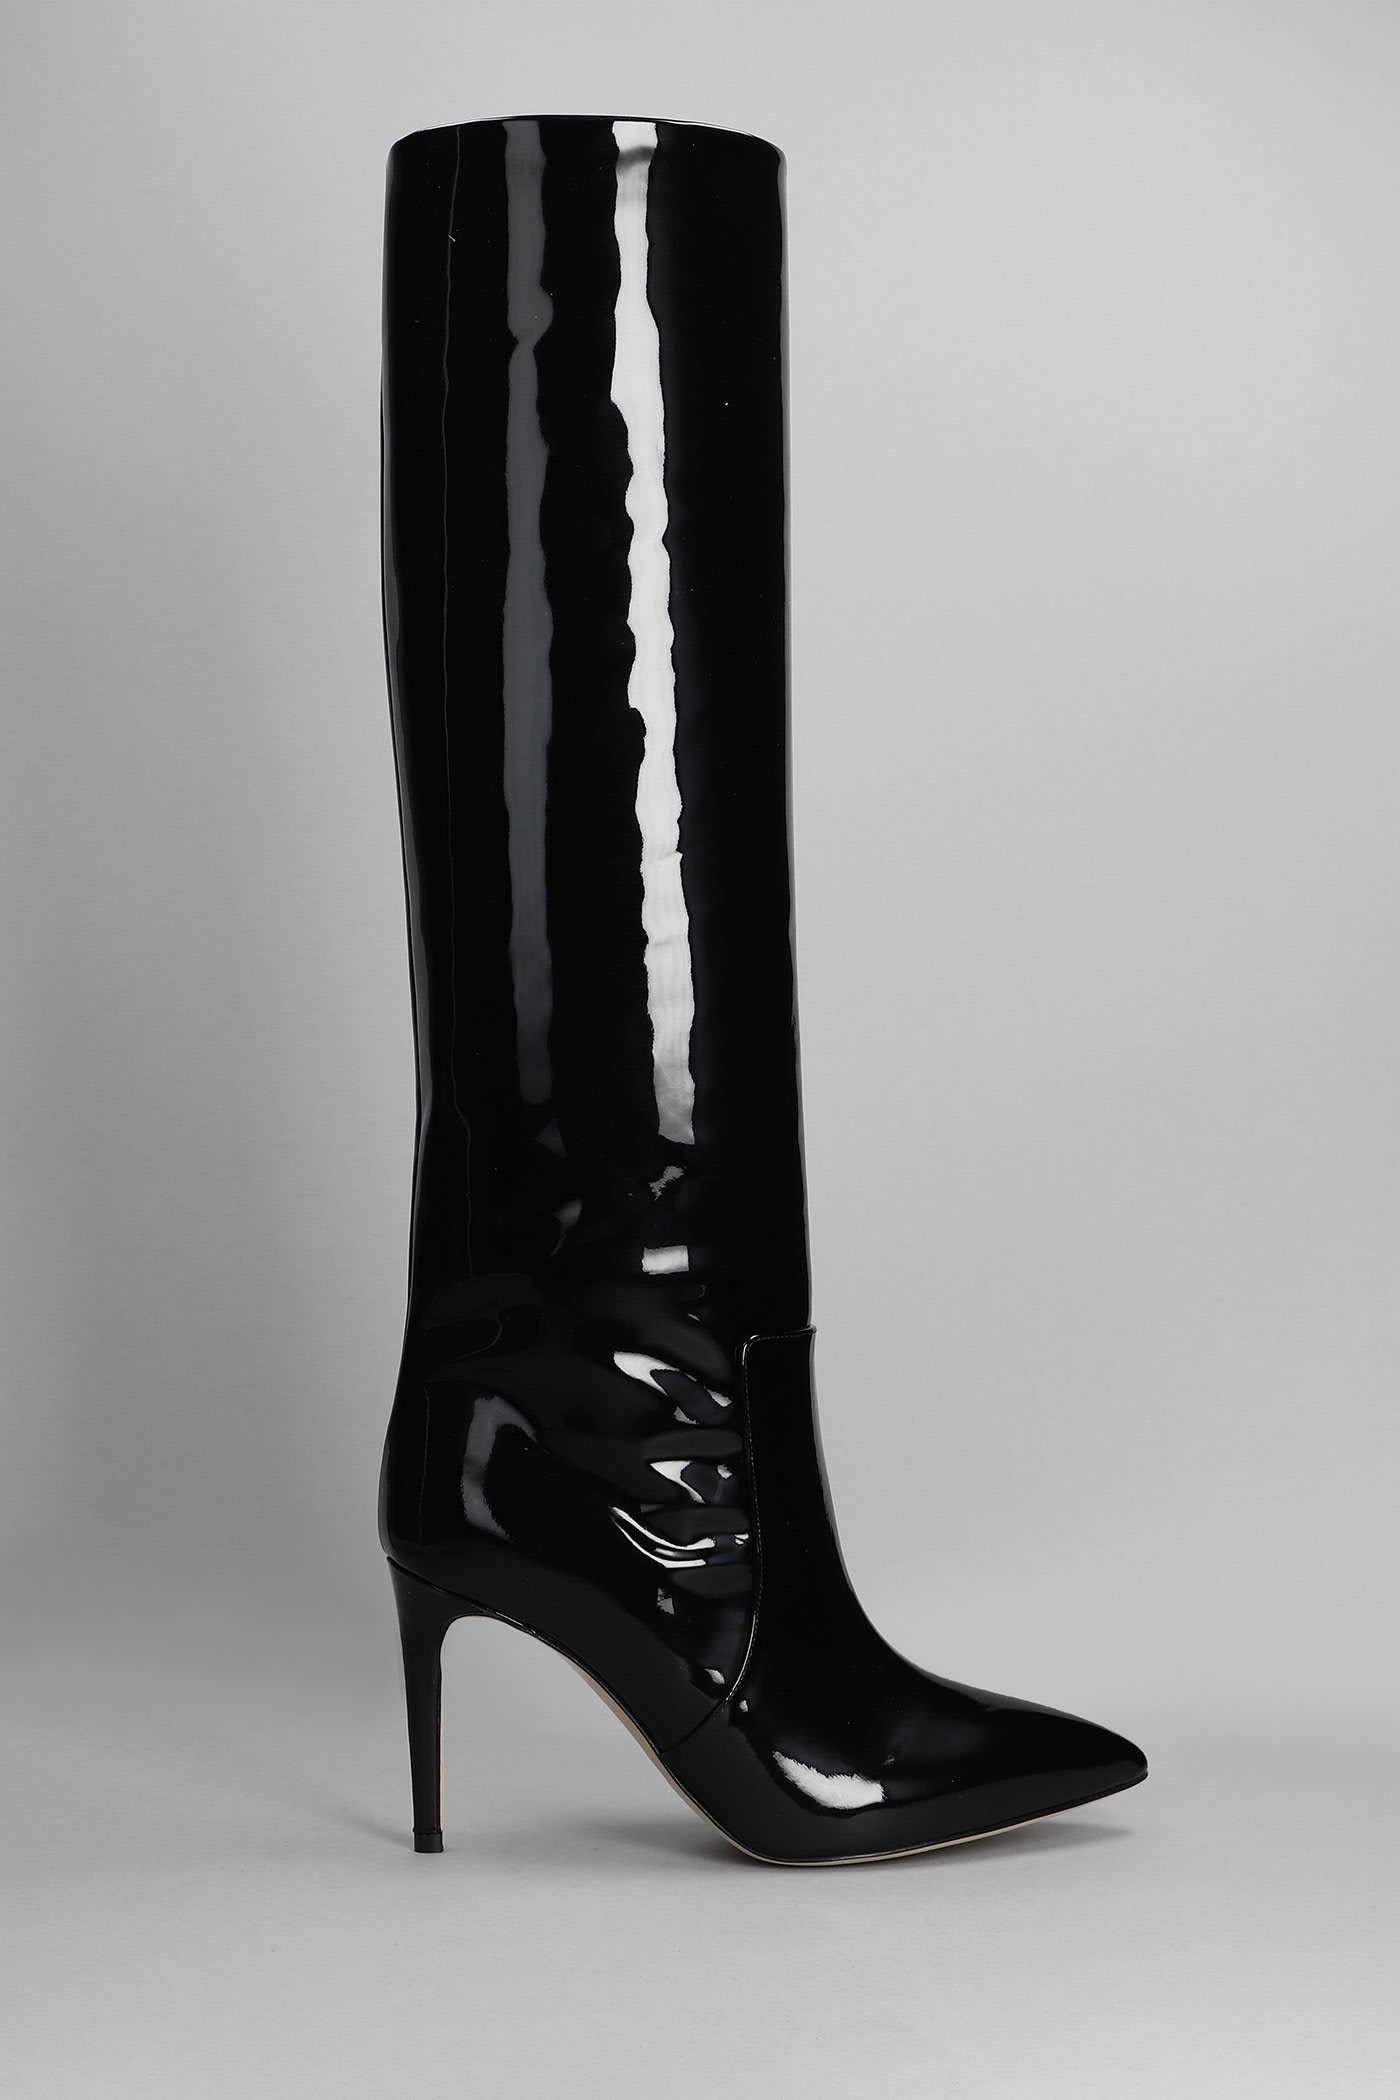 Paris Texas High Heels Boots In Black Patent Leather